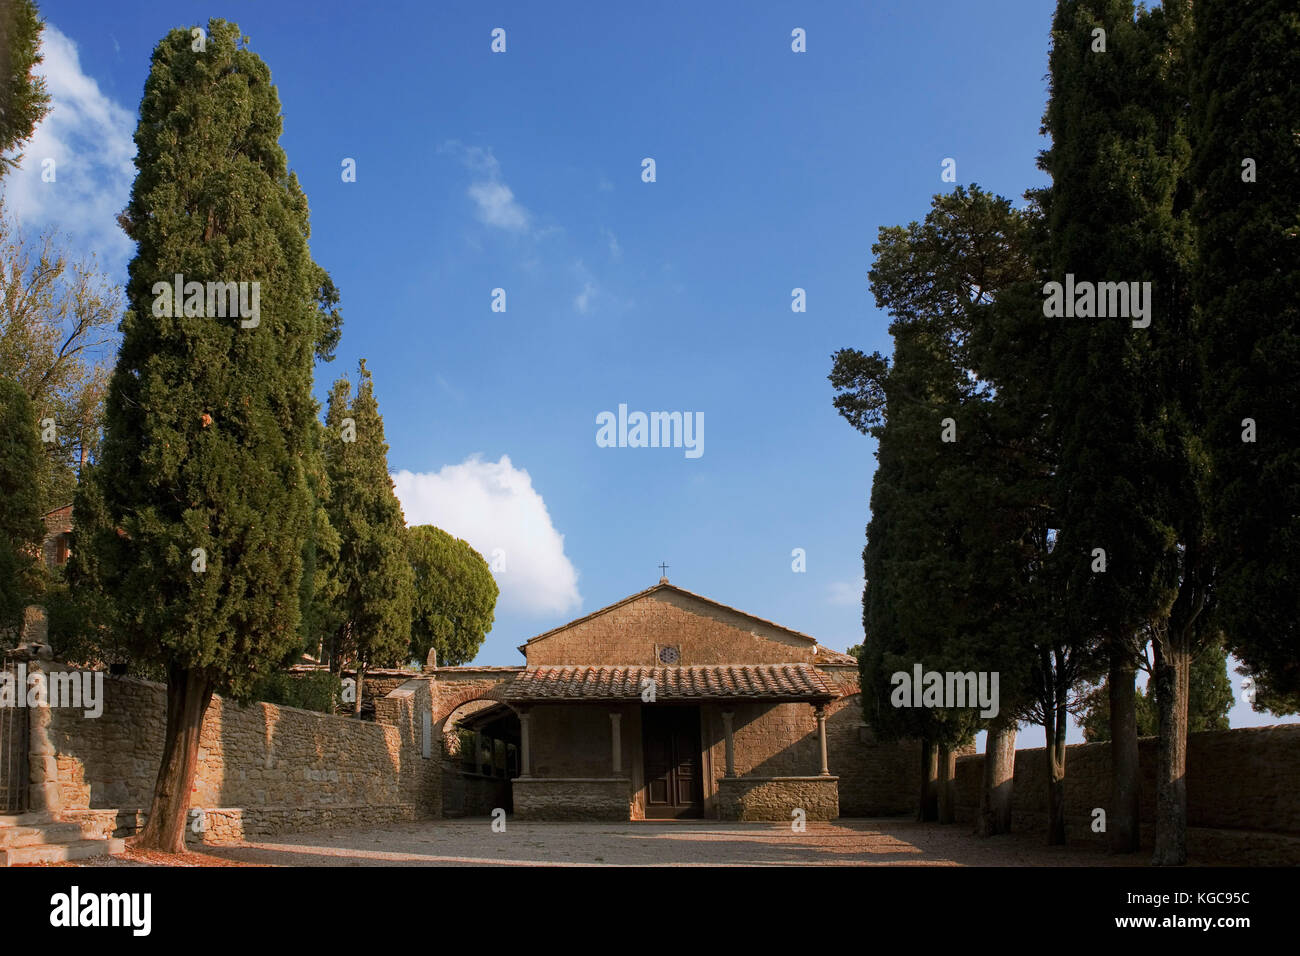 Chiesa San Niccolò, Cortona, Arezzo, Tuscany, Italy: a charming 15th church approached through a peaceful walled courtyard with cypresses Stock Photo